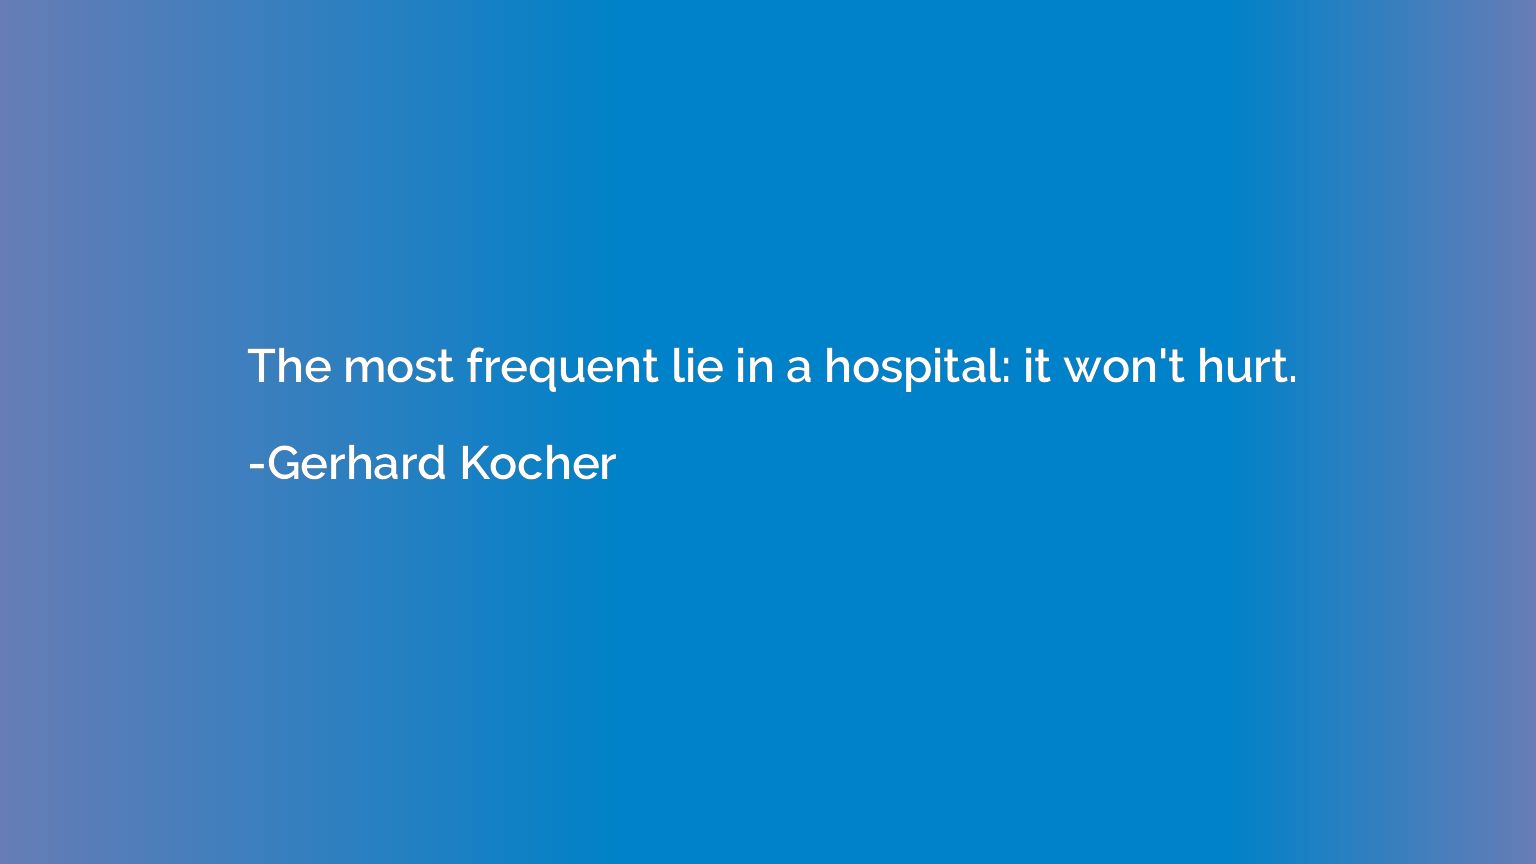 The most frequent lie in a hospital: it won't hurt.